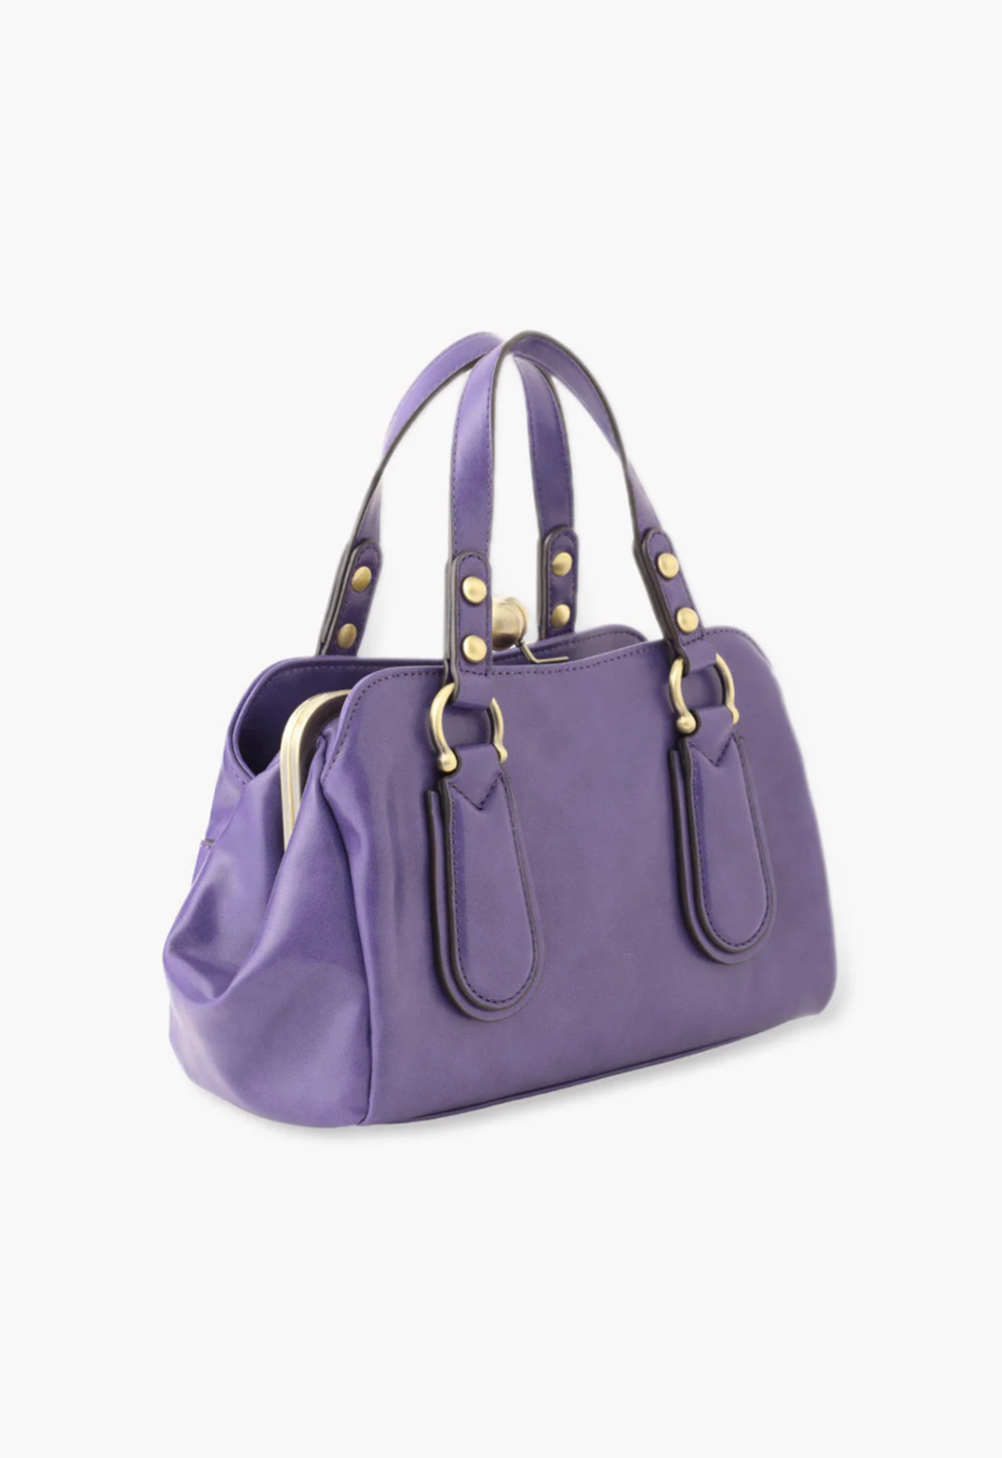 Handbag purple, golden ball clasp closure, hand-straps with hardware and attach pads